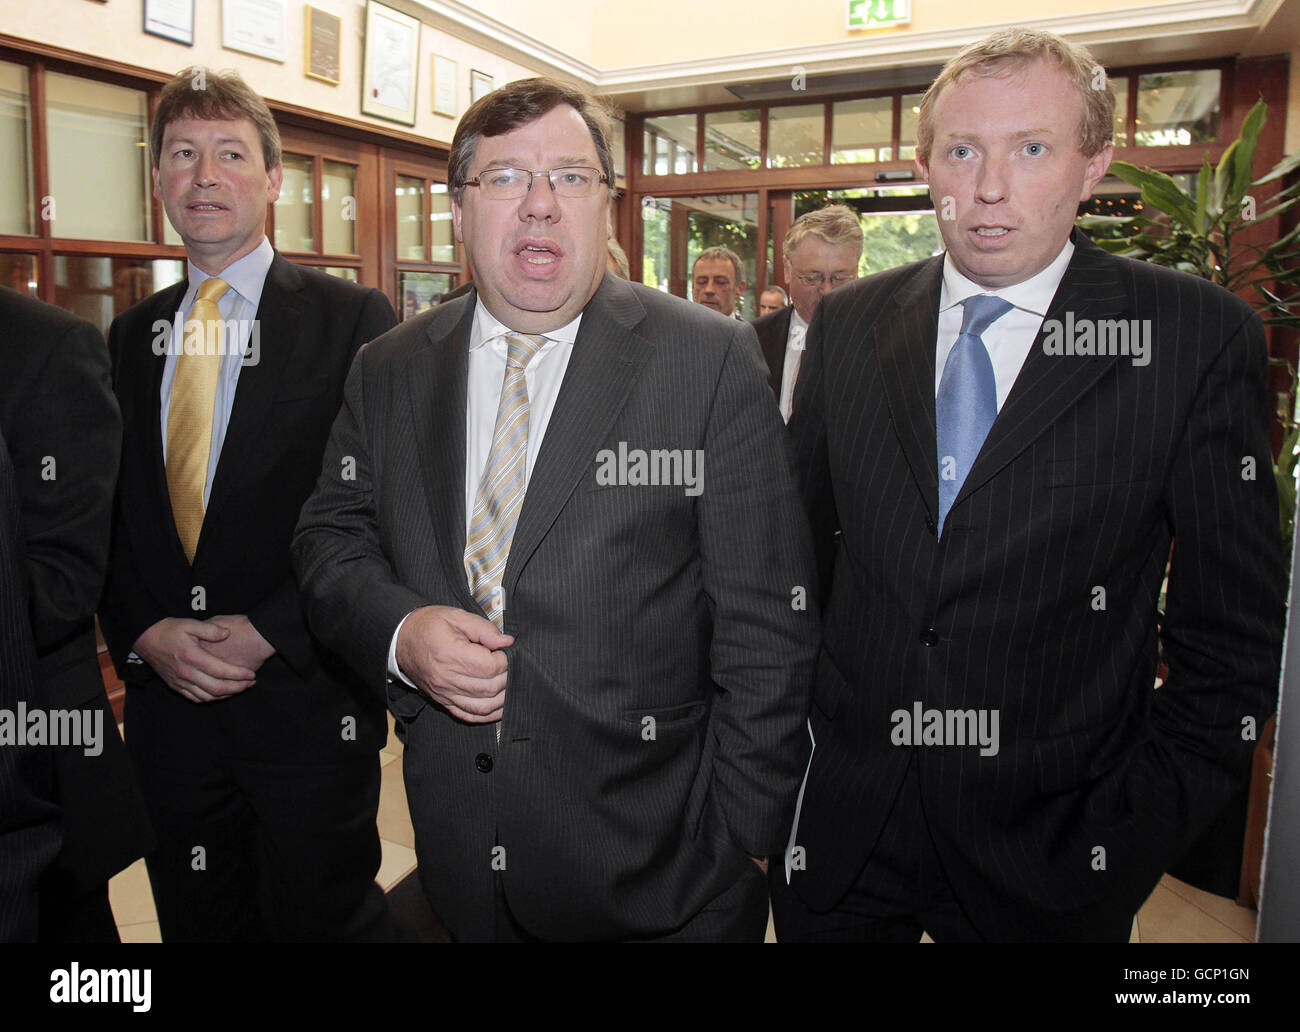 Taoiseach Brian Cowen at the Ardilaun Hotel in Galway city before he held a press conference to deny giving a live radio interview while drunk or hungover during the Fianna Fail party's annual get together ahead of the new Dail (parliament) term. Stock Photo